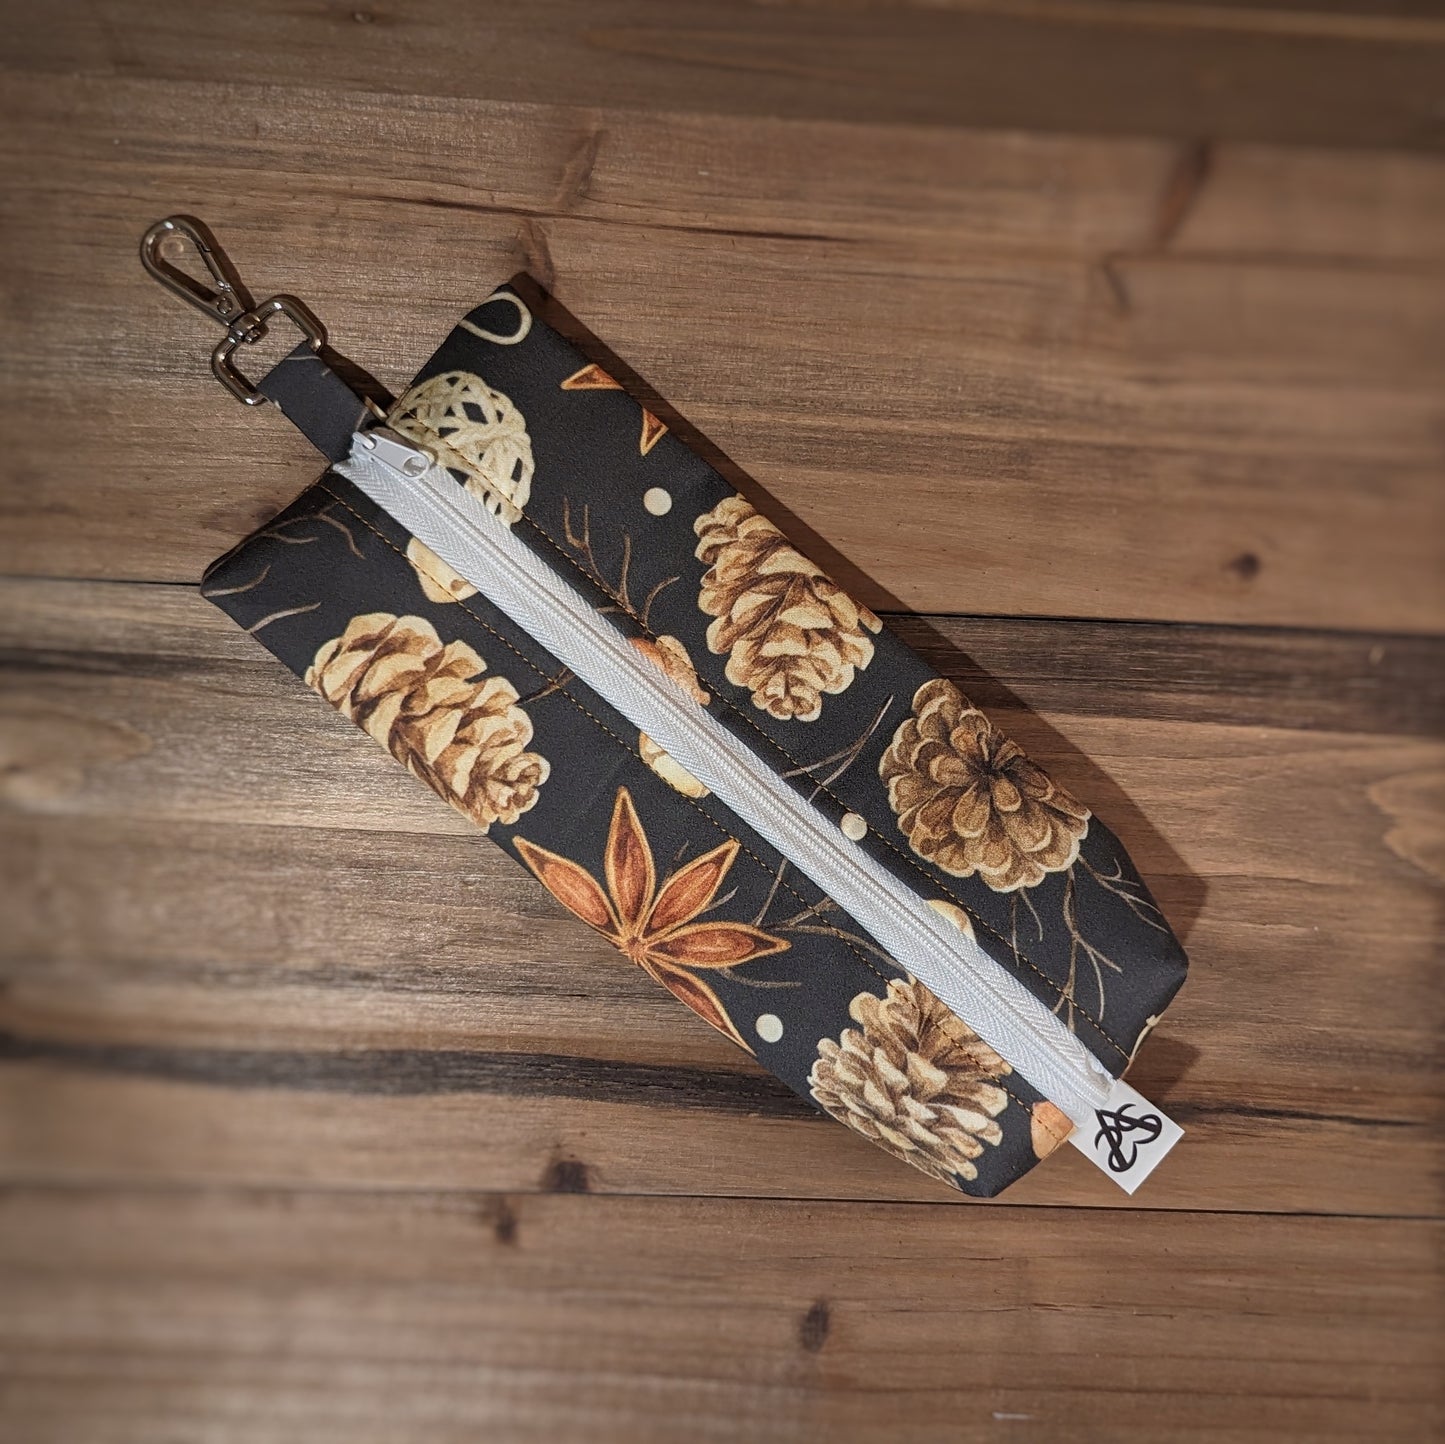 A long skinny pencil case with a keychain top has star anise, acorn, sticks, and pinecones outside and a white zipper up the middle.